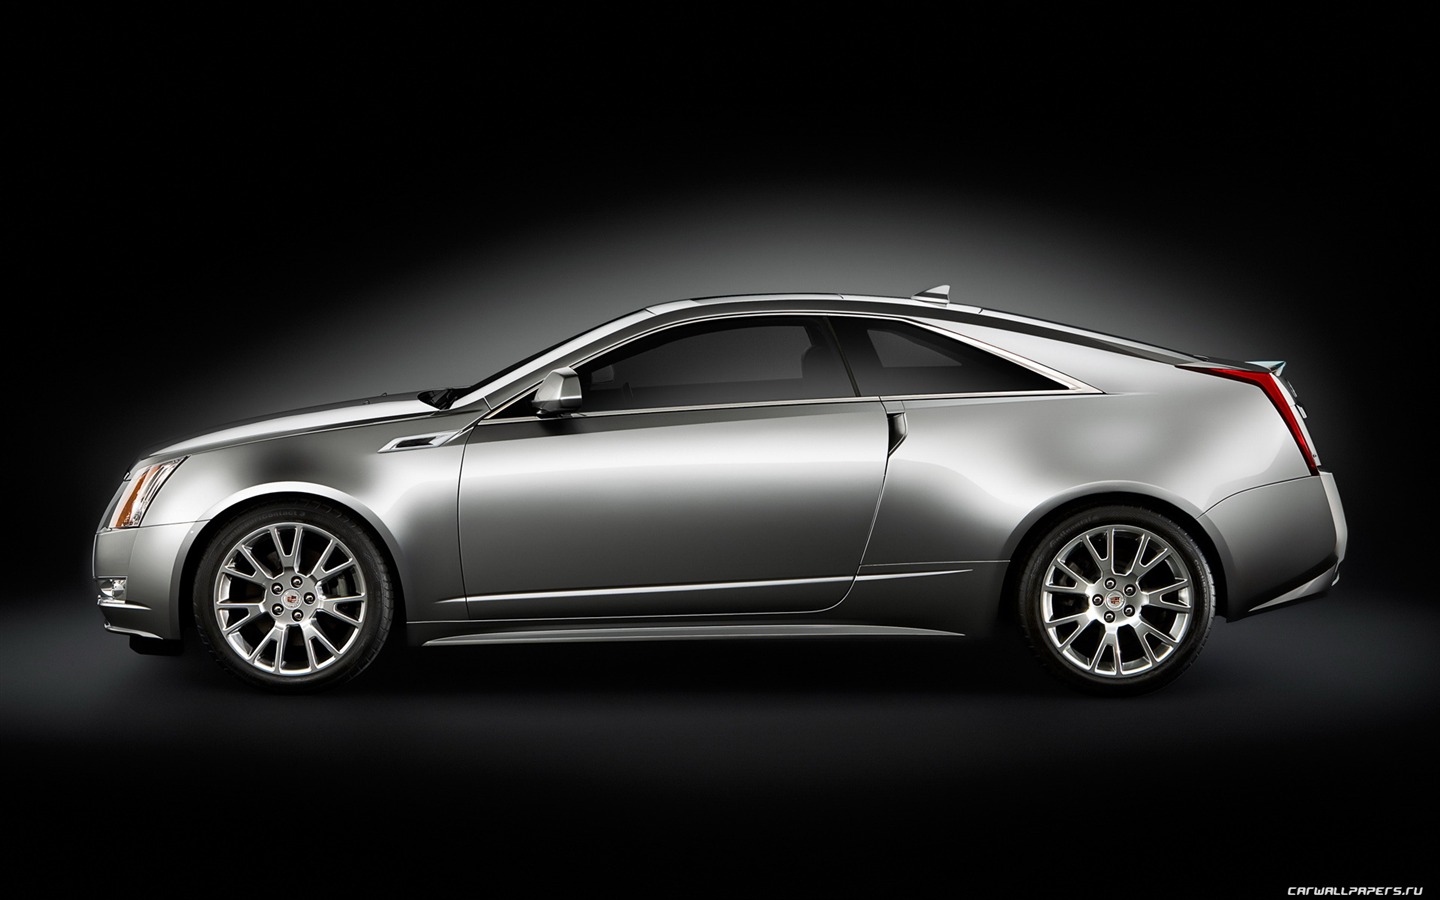 Cadillac CTS Coupe - 2011 凱迪拉克 #5 - 1440x900